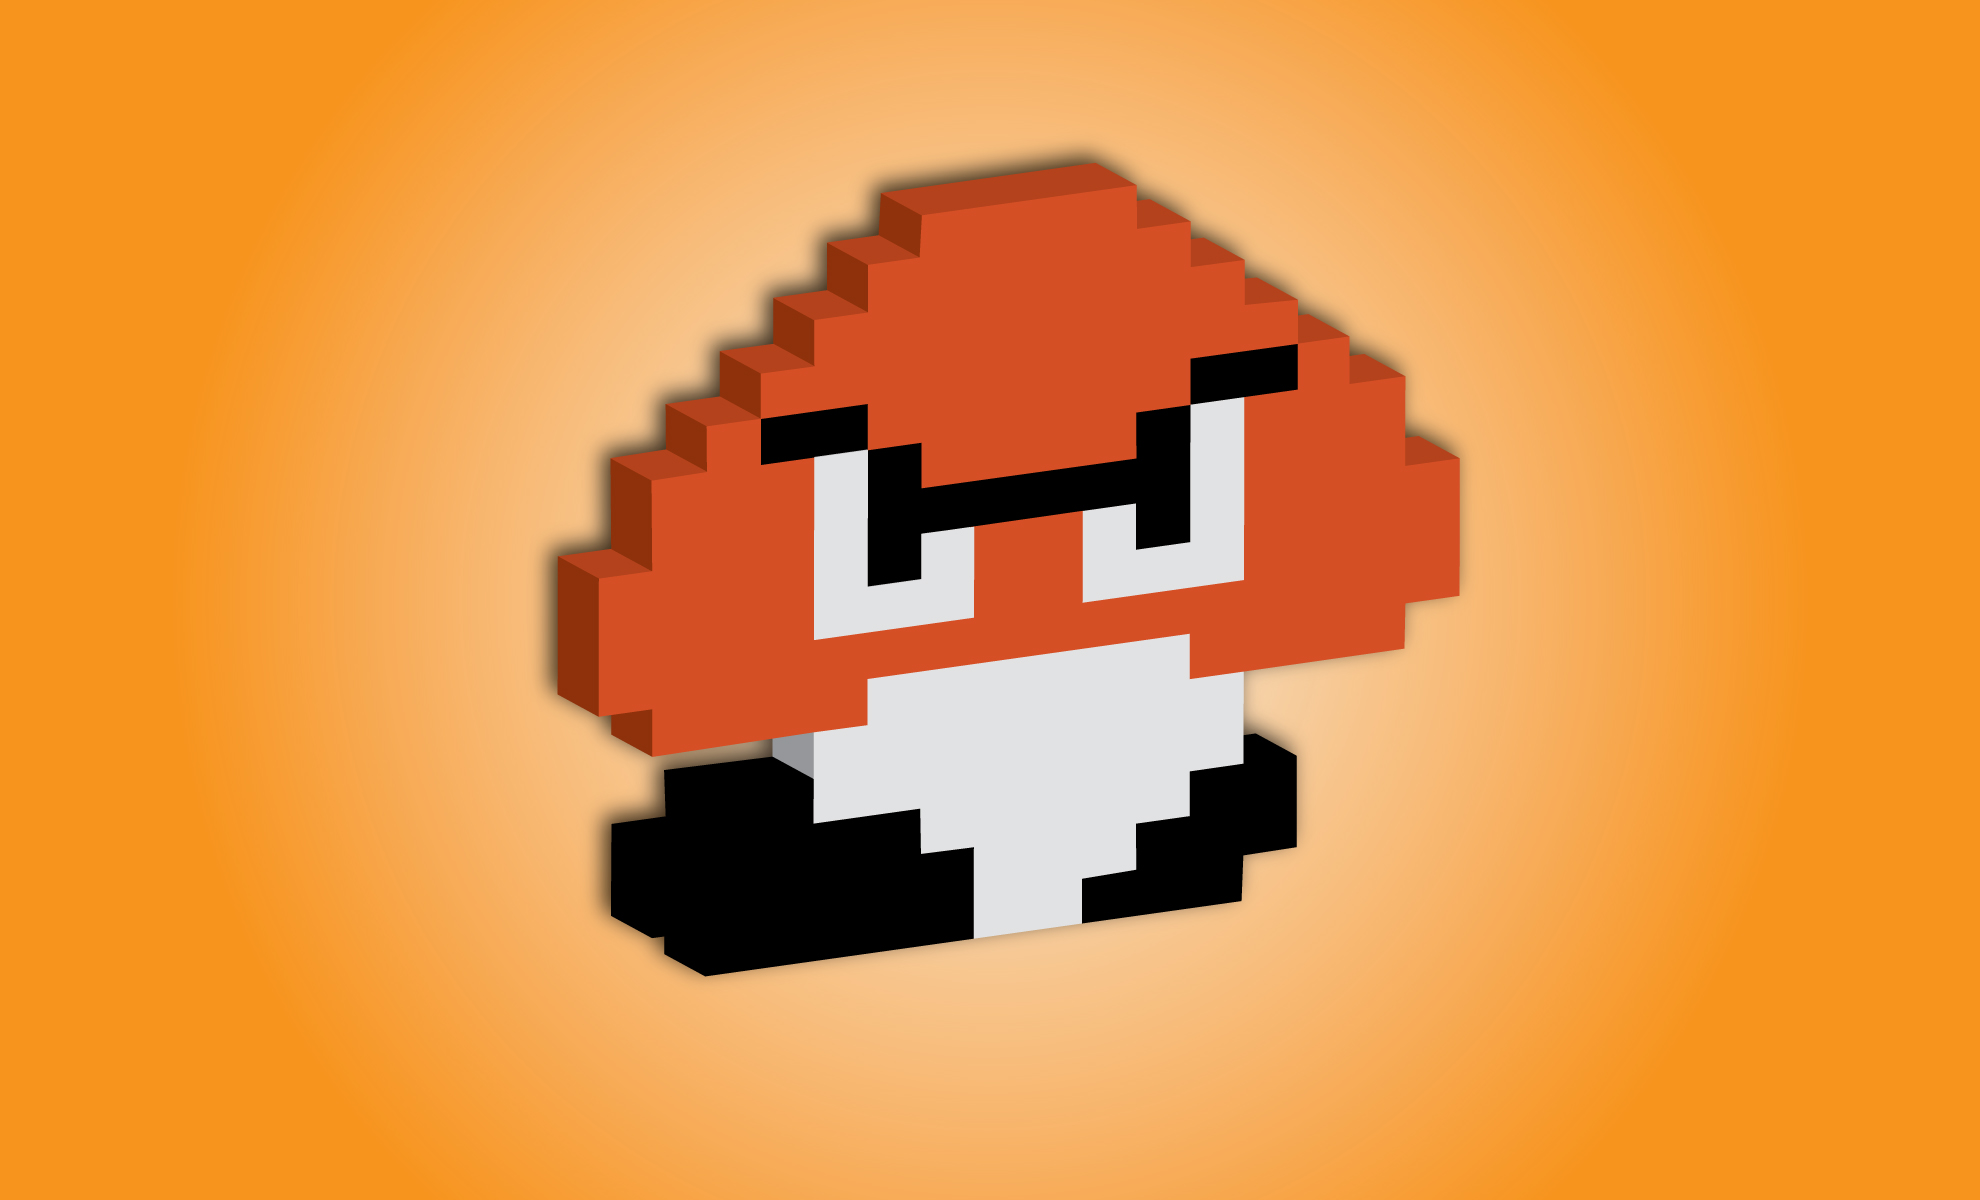 Goomba Smb Bit Oc Check Out This Wg HD Wallpaper General